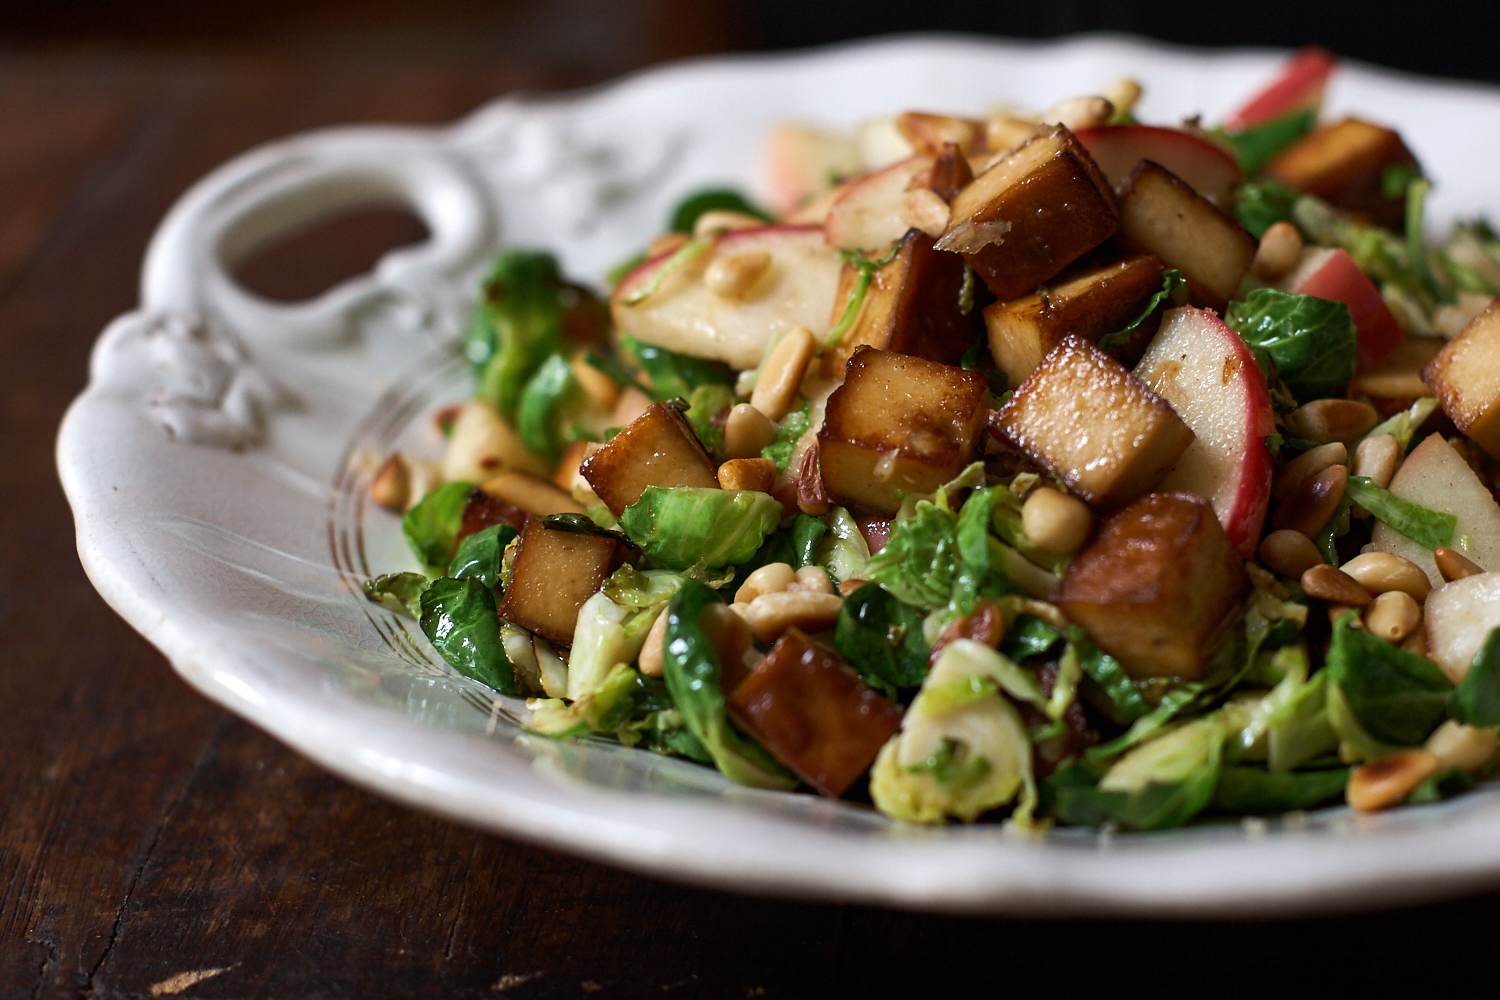 Caramelized Brussels Sprouts and Apples with Tofu